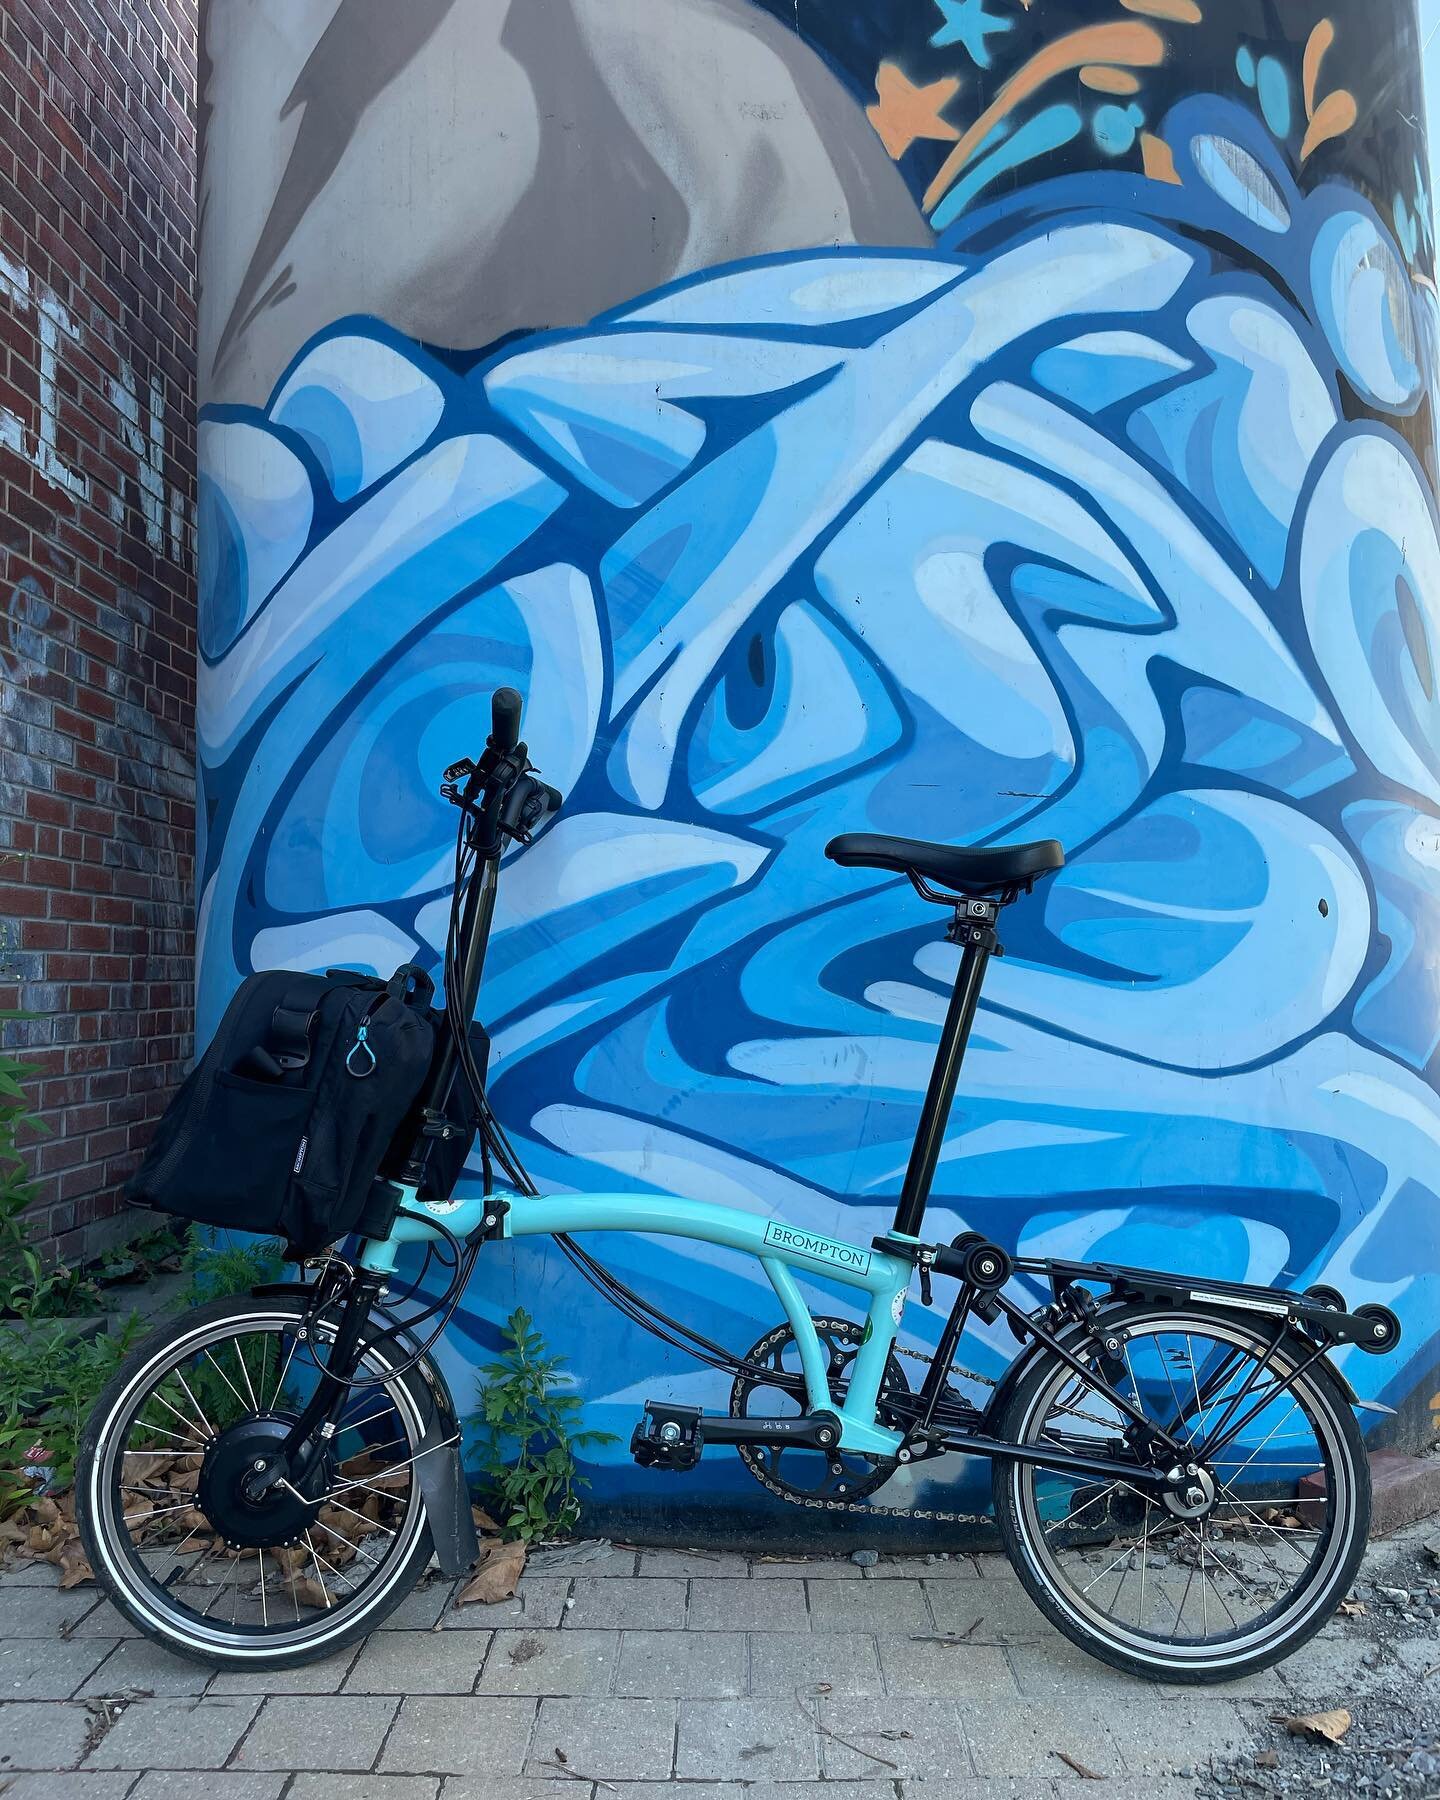 #FridayVibes with Ohms the electric @bromptonbicycle at @evergreen_brick_works #LifeIsARide